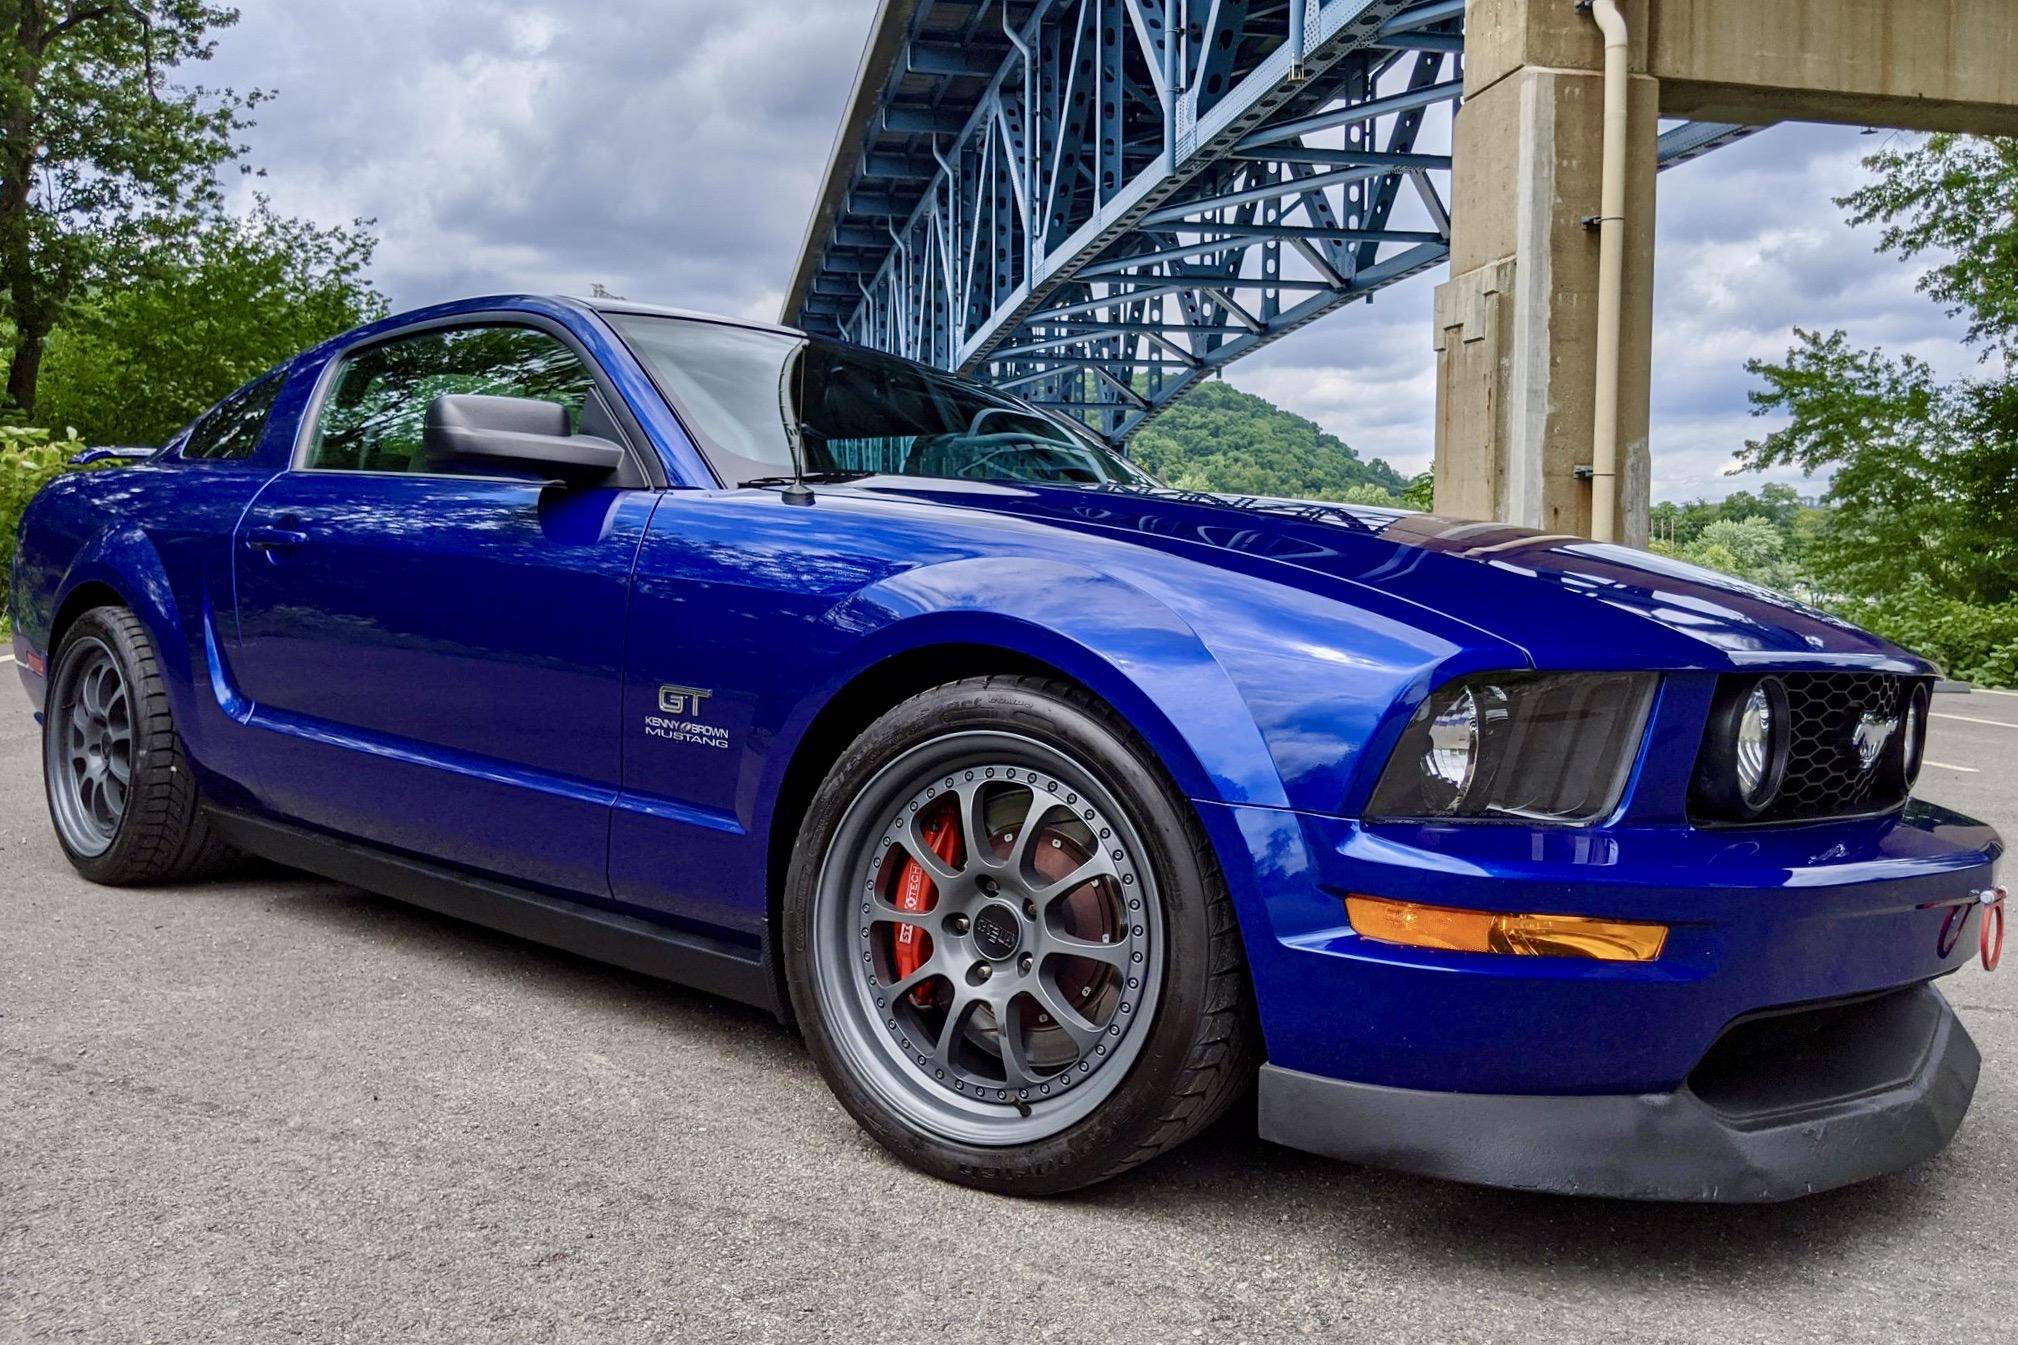 Sonic Blue 2005 Ford Mustang